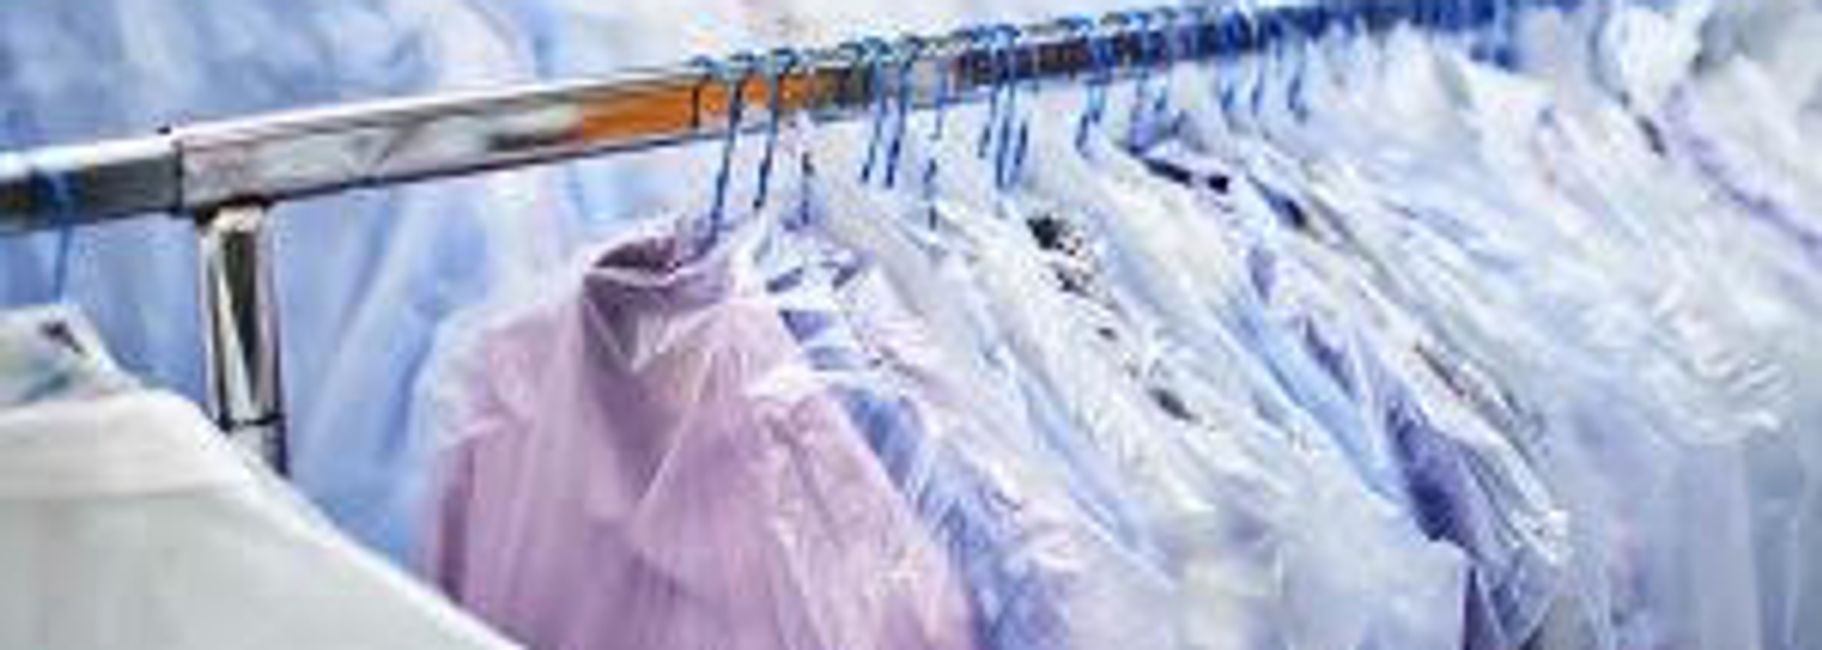 Clean Laundry's drop Off Dry Cleaning